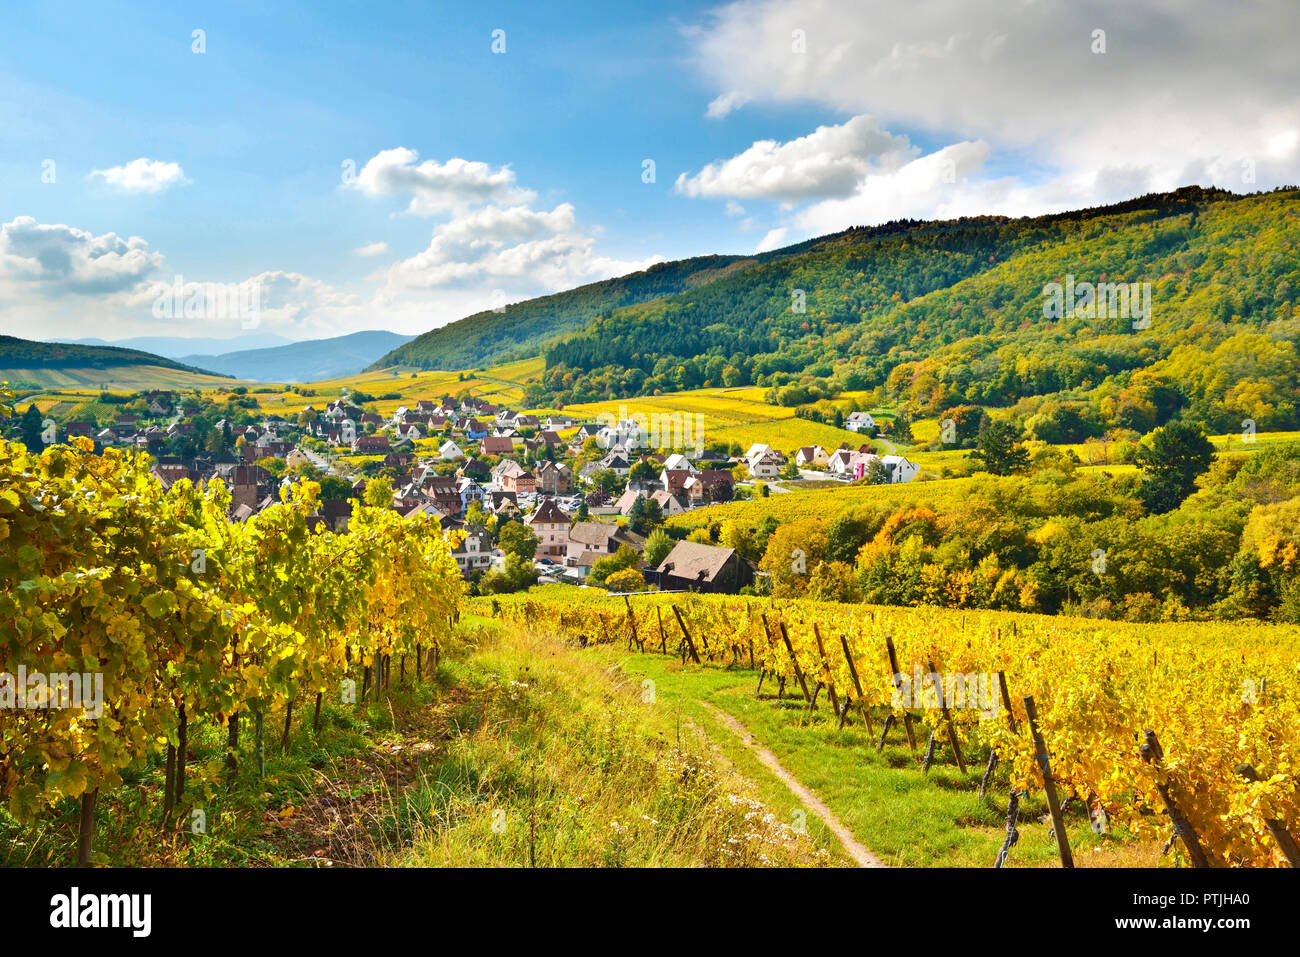 An autumn view of Riquewihr looking across vineyards after the grape harvest. Stock Photo